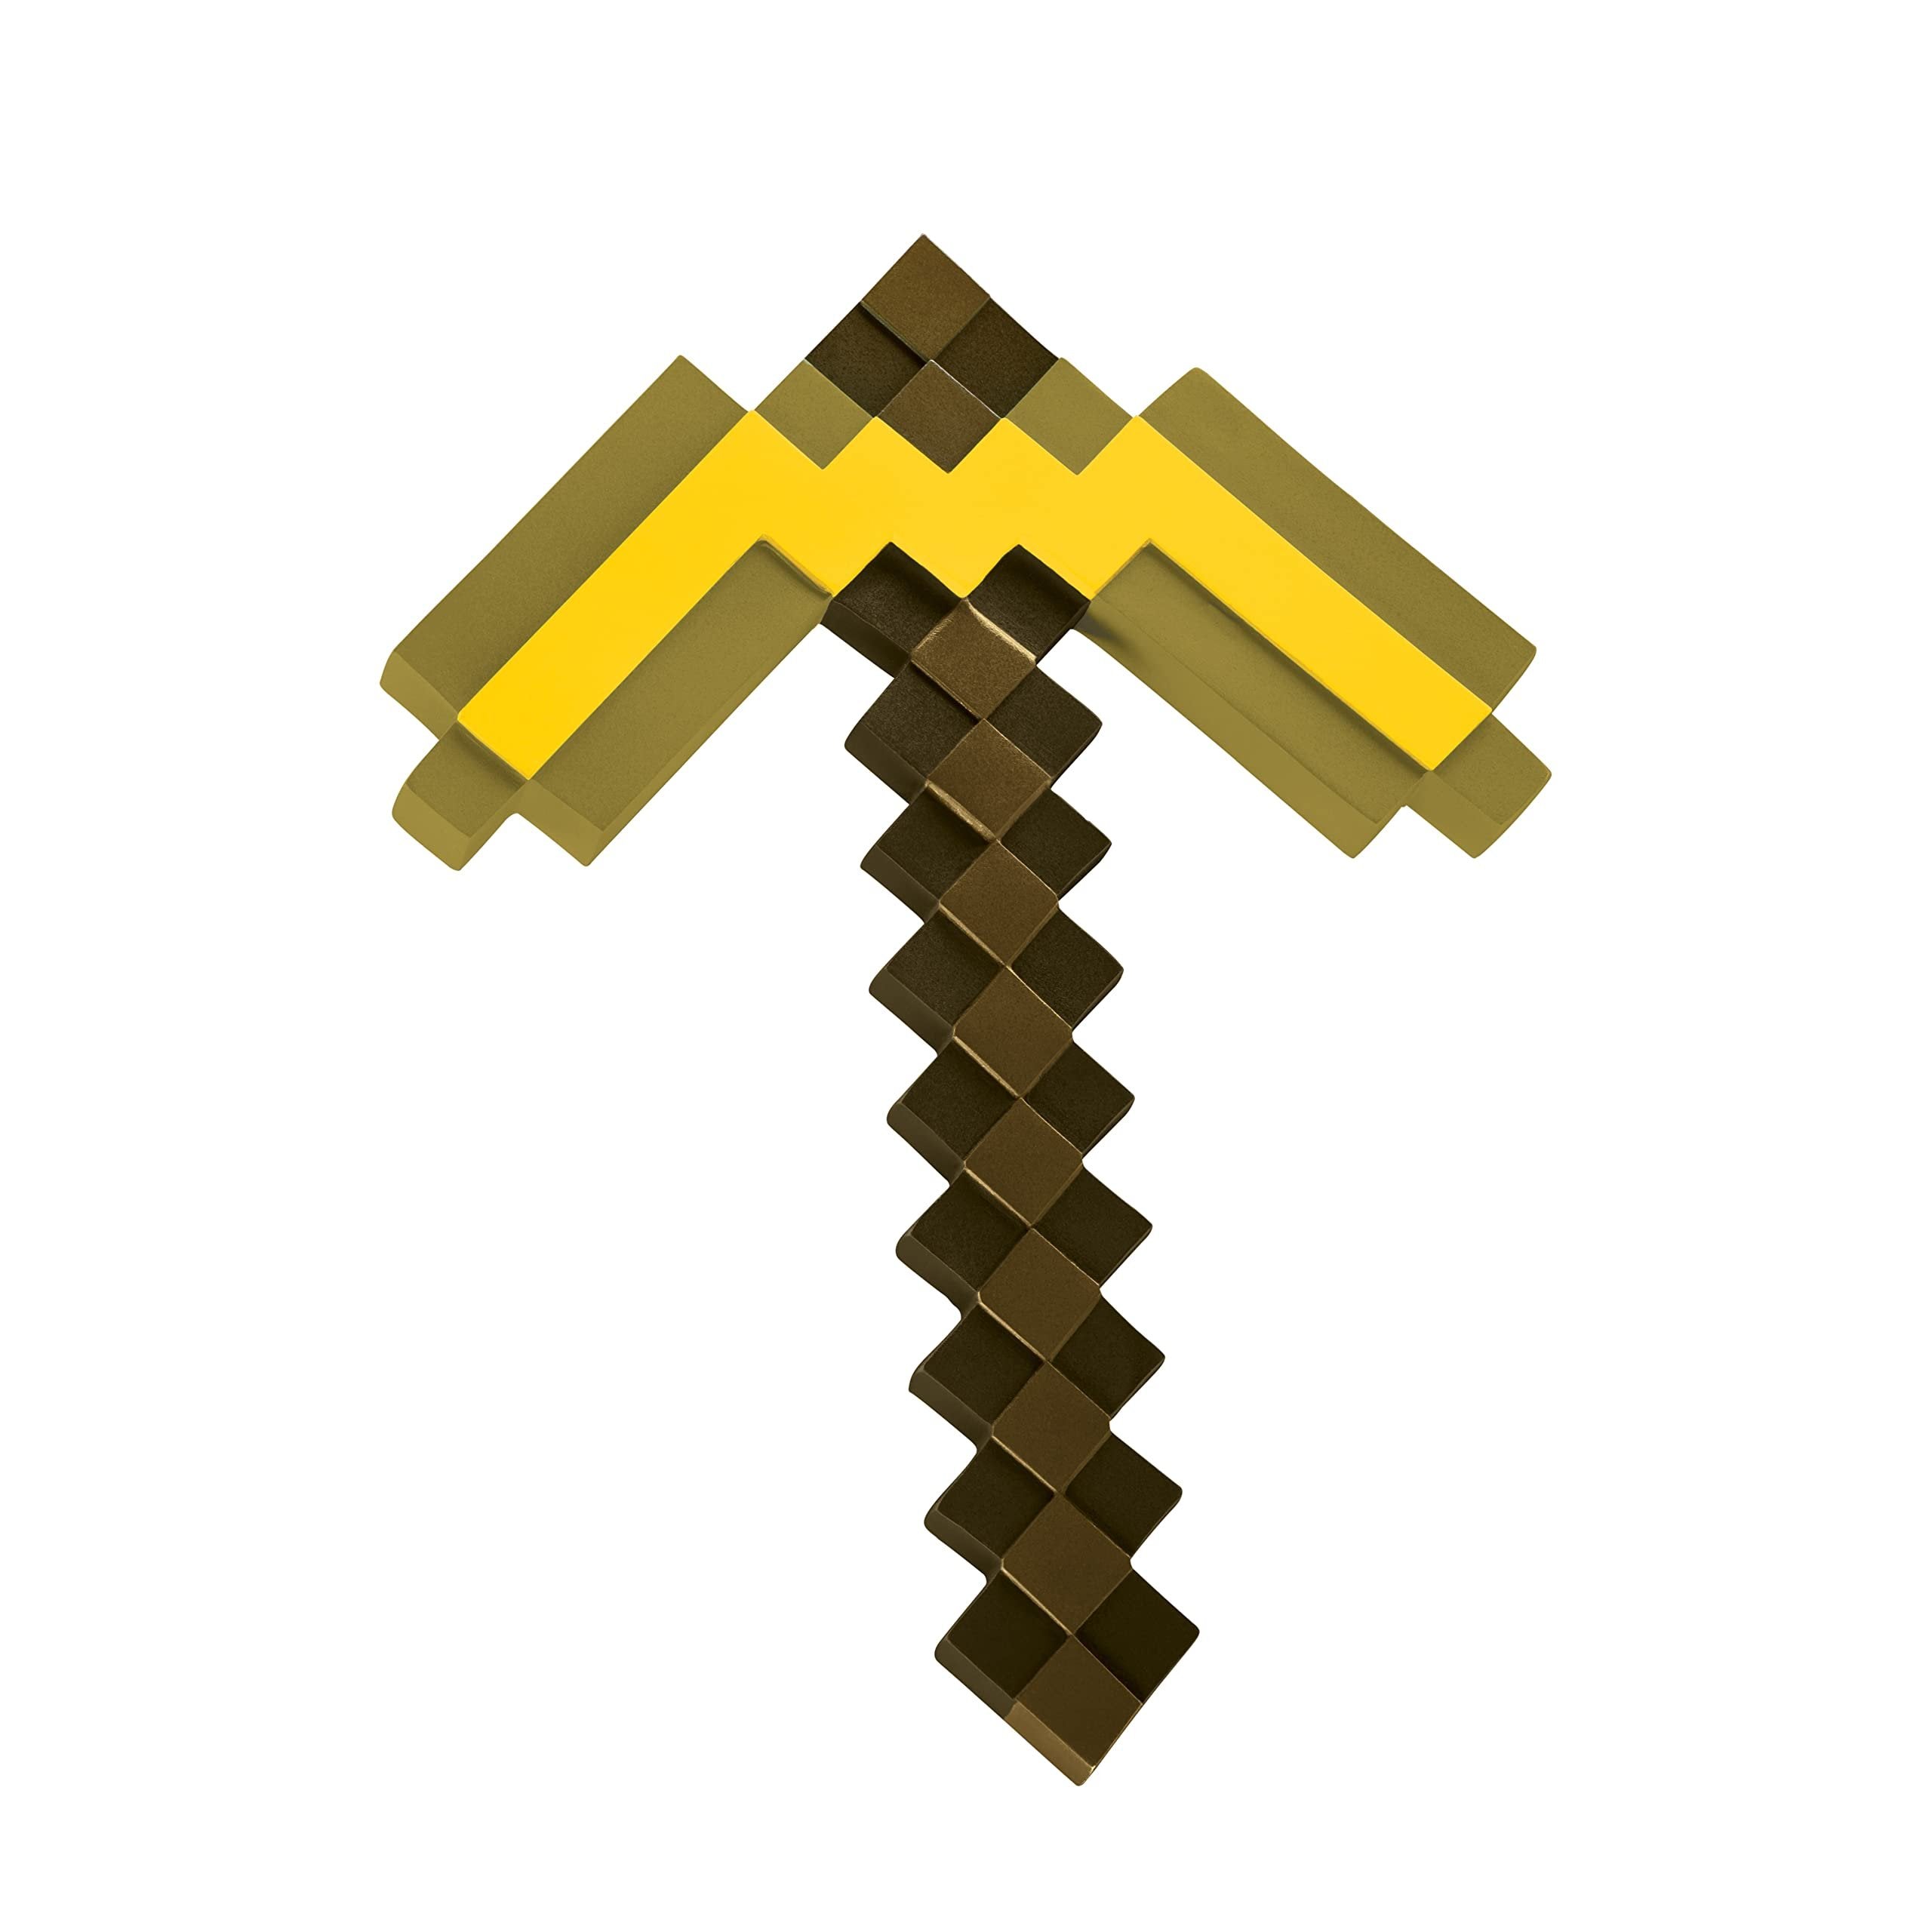 Official Minecraft Gold Pickaxe Costume Accessory - One Size, Multicolored - Free Shipping & Returns